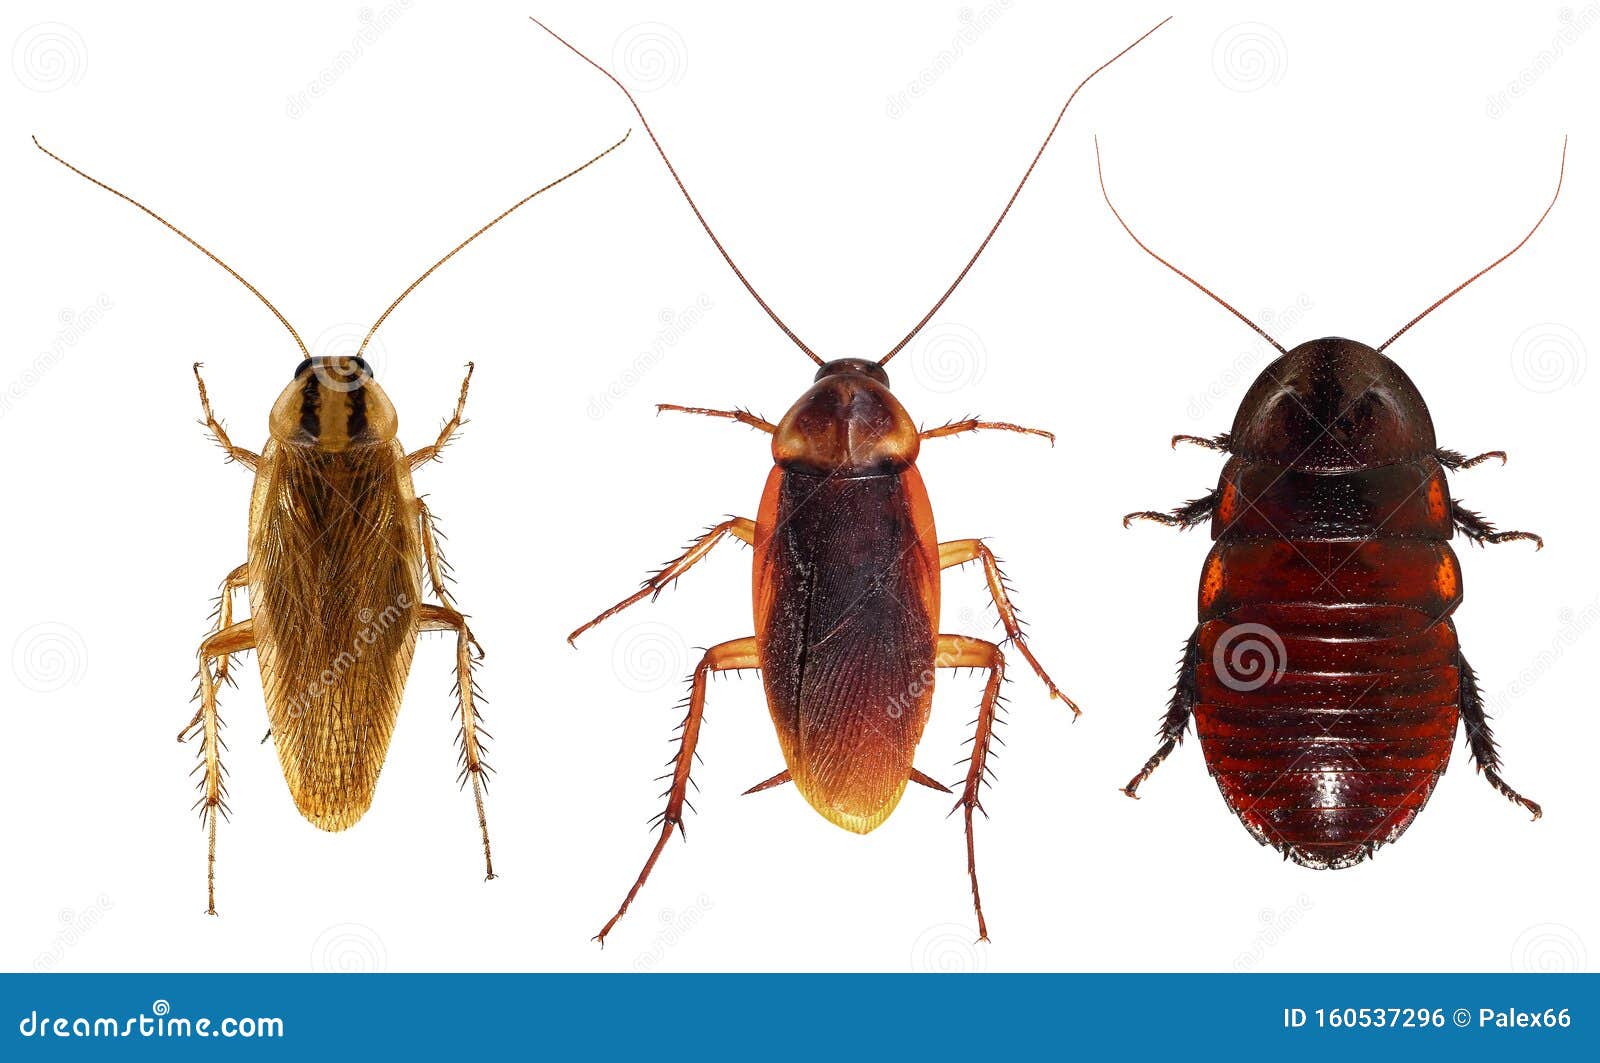 Cockroaches stock photo. Image of parasite, germanica - 160537296